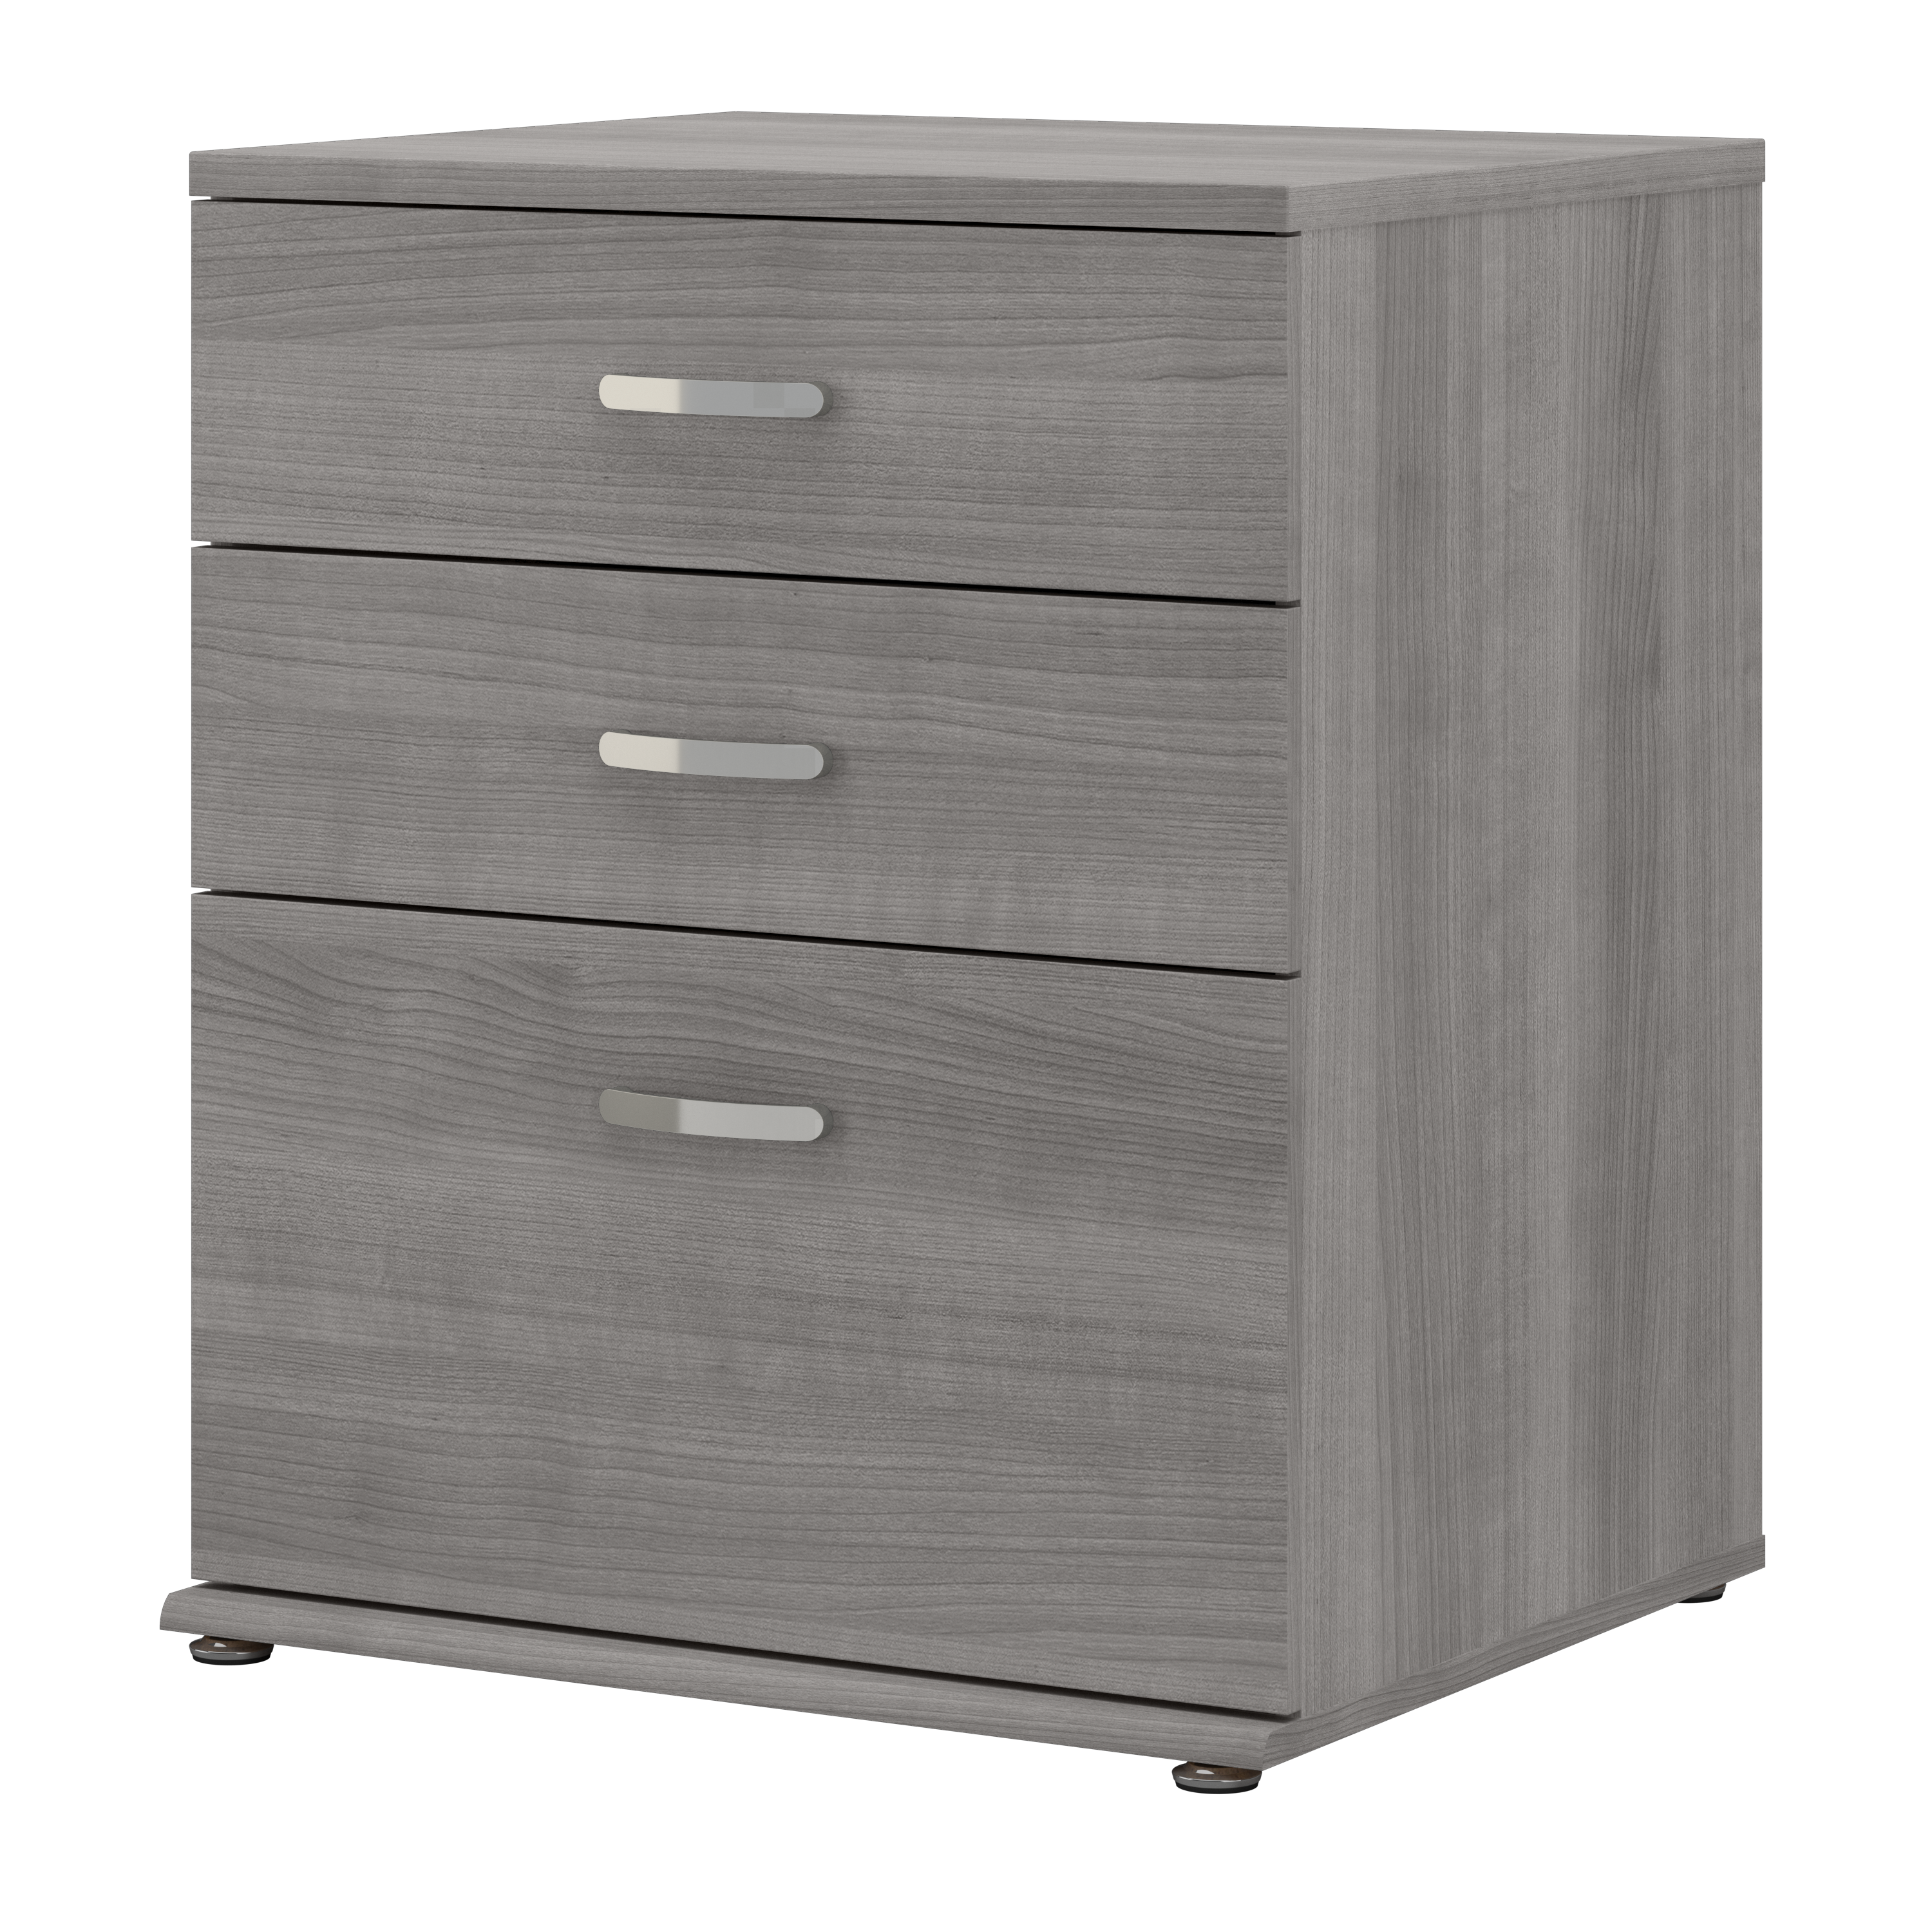 Shop Bush Business Furniture Universal Floor Storage Cabinet with Drawers 02 UNS328PG #color_platinum gray